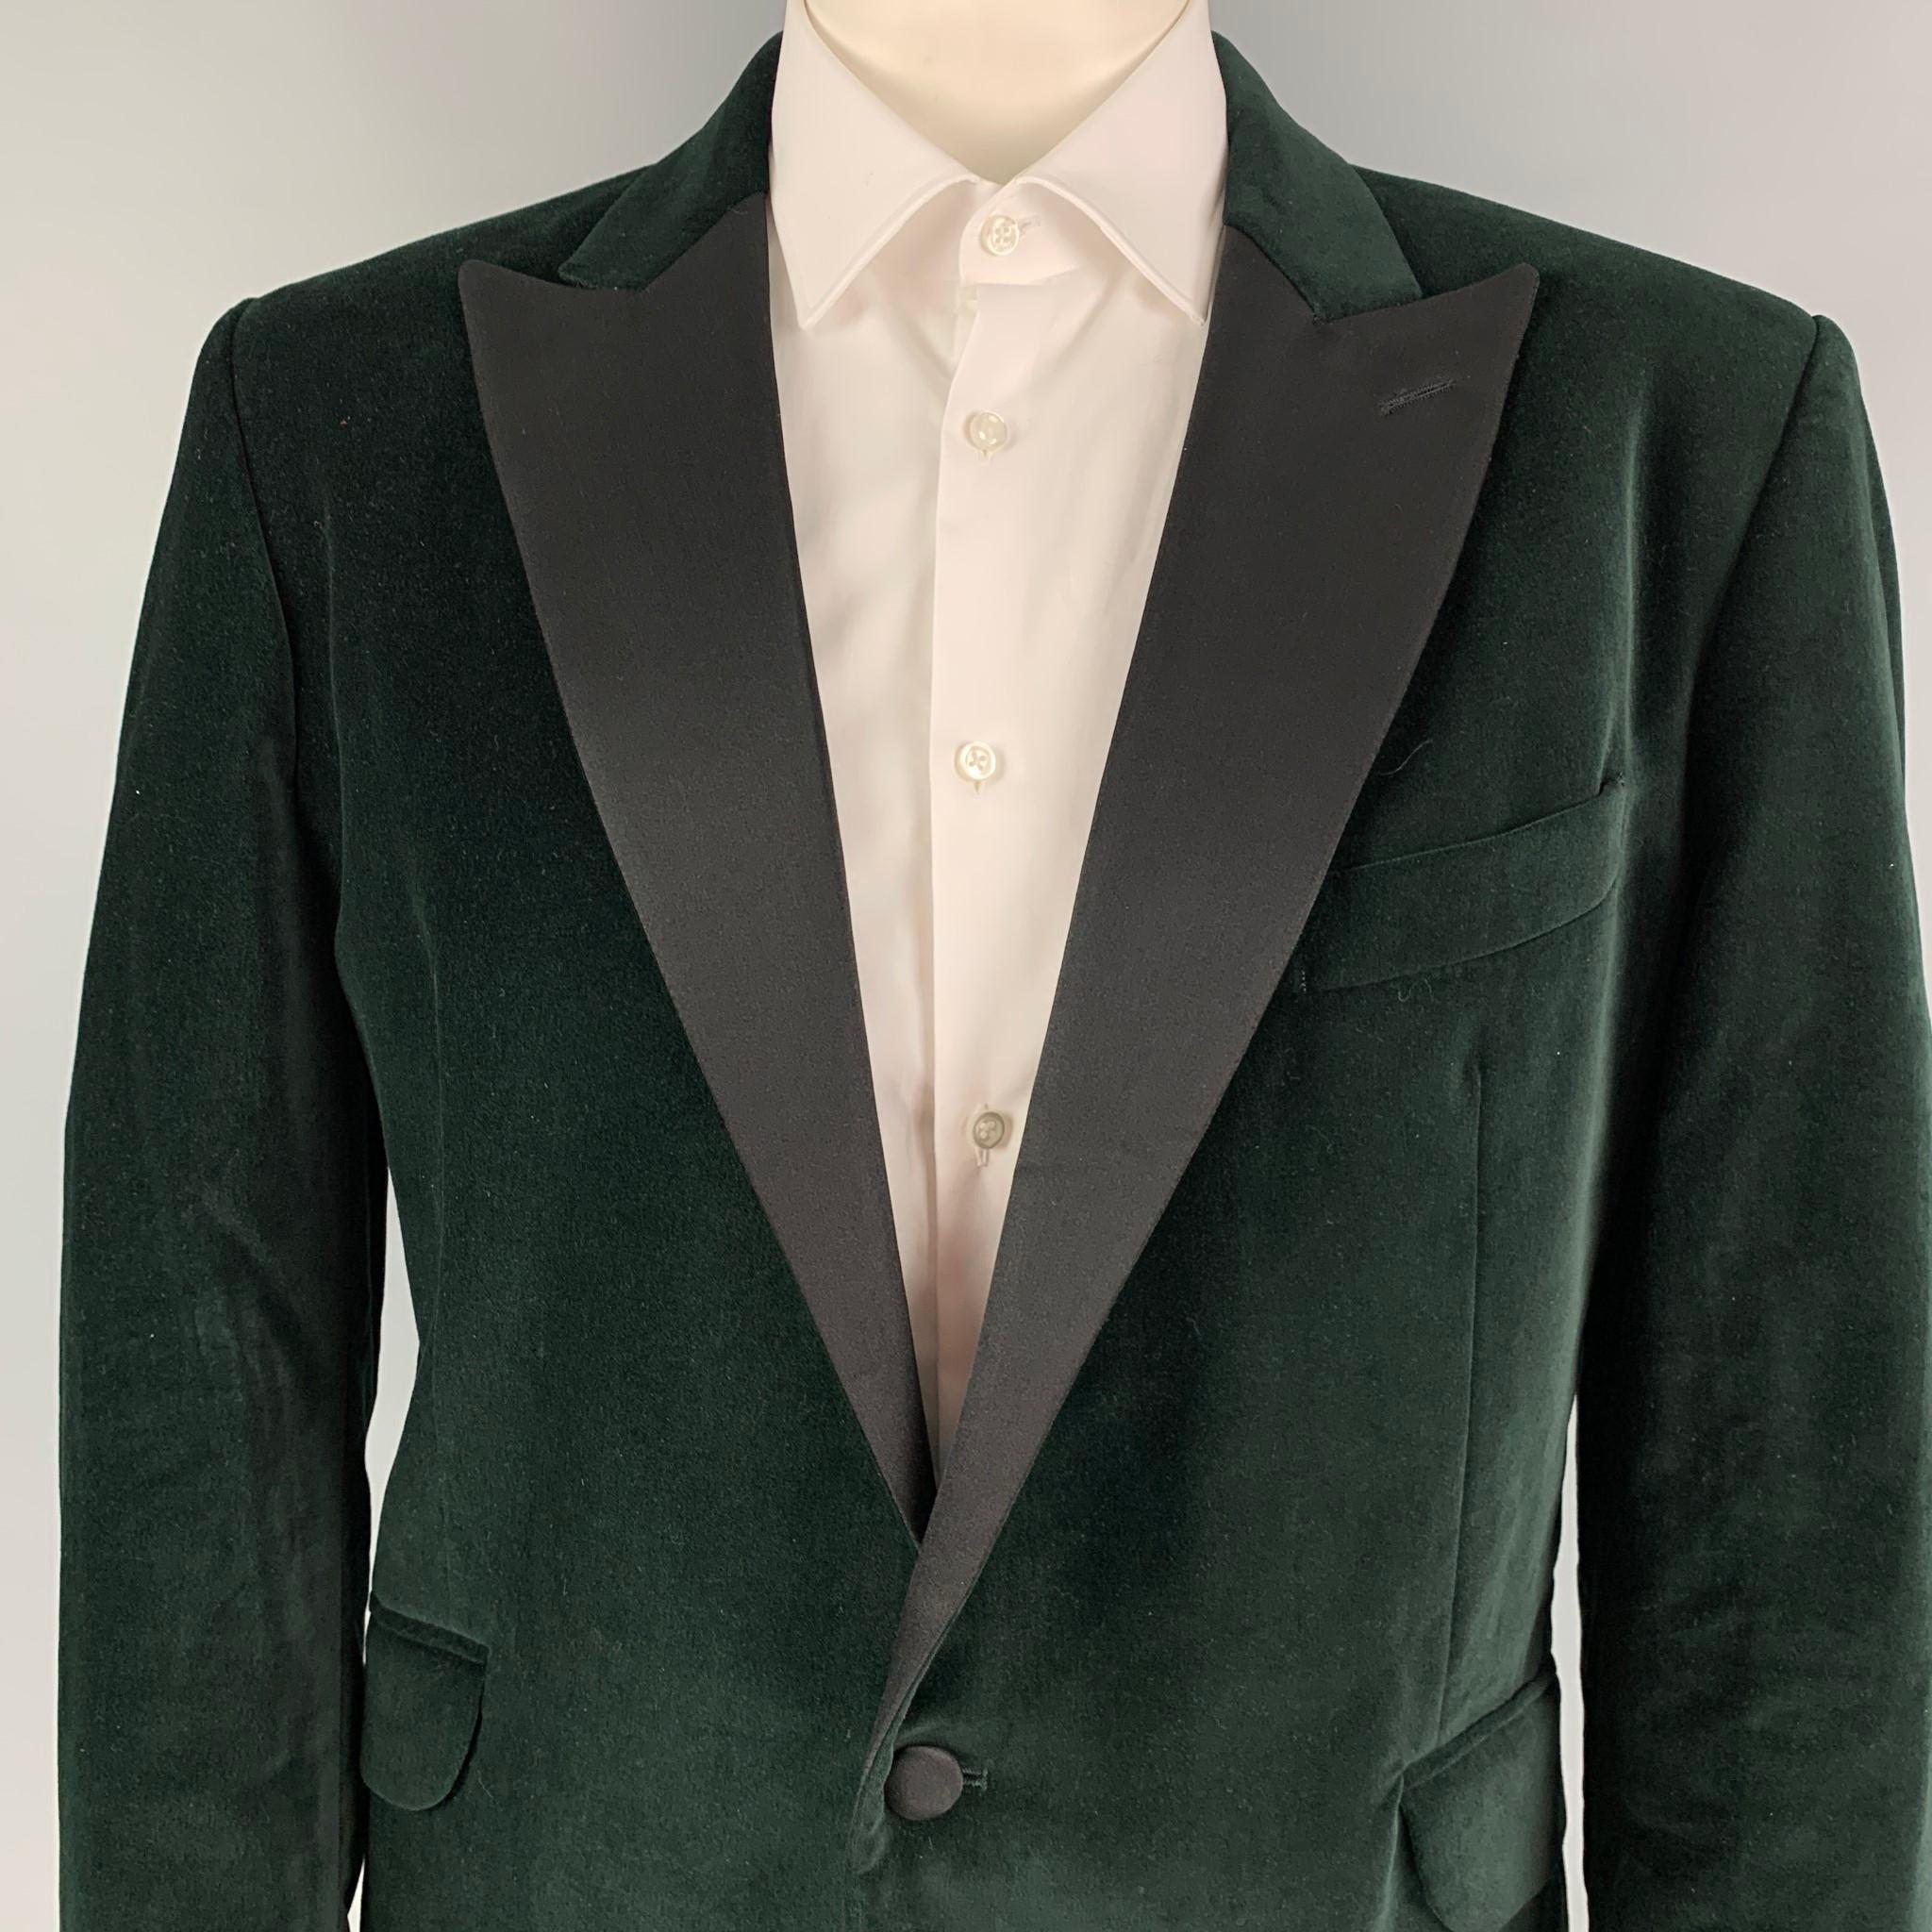 KENT CURWEN sport coat comes in a forest green velvet with a full liner featuring a black peak lapel, flap pockets, double back vent, and a single button closure. Made in Romania.

Very Good Pre-Owned Condition.
Marked: